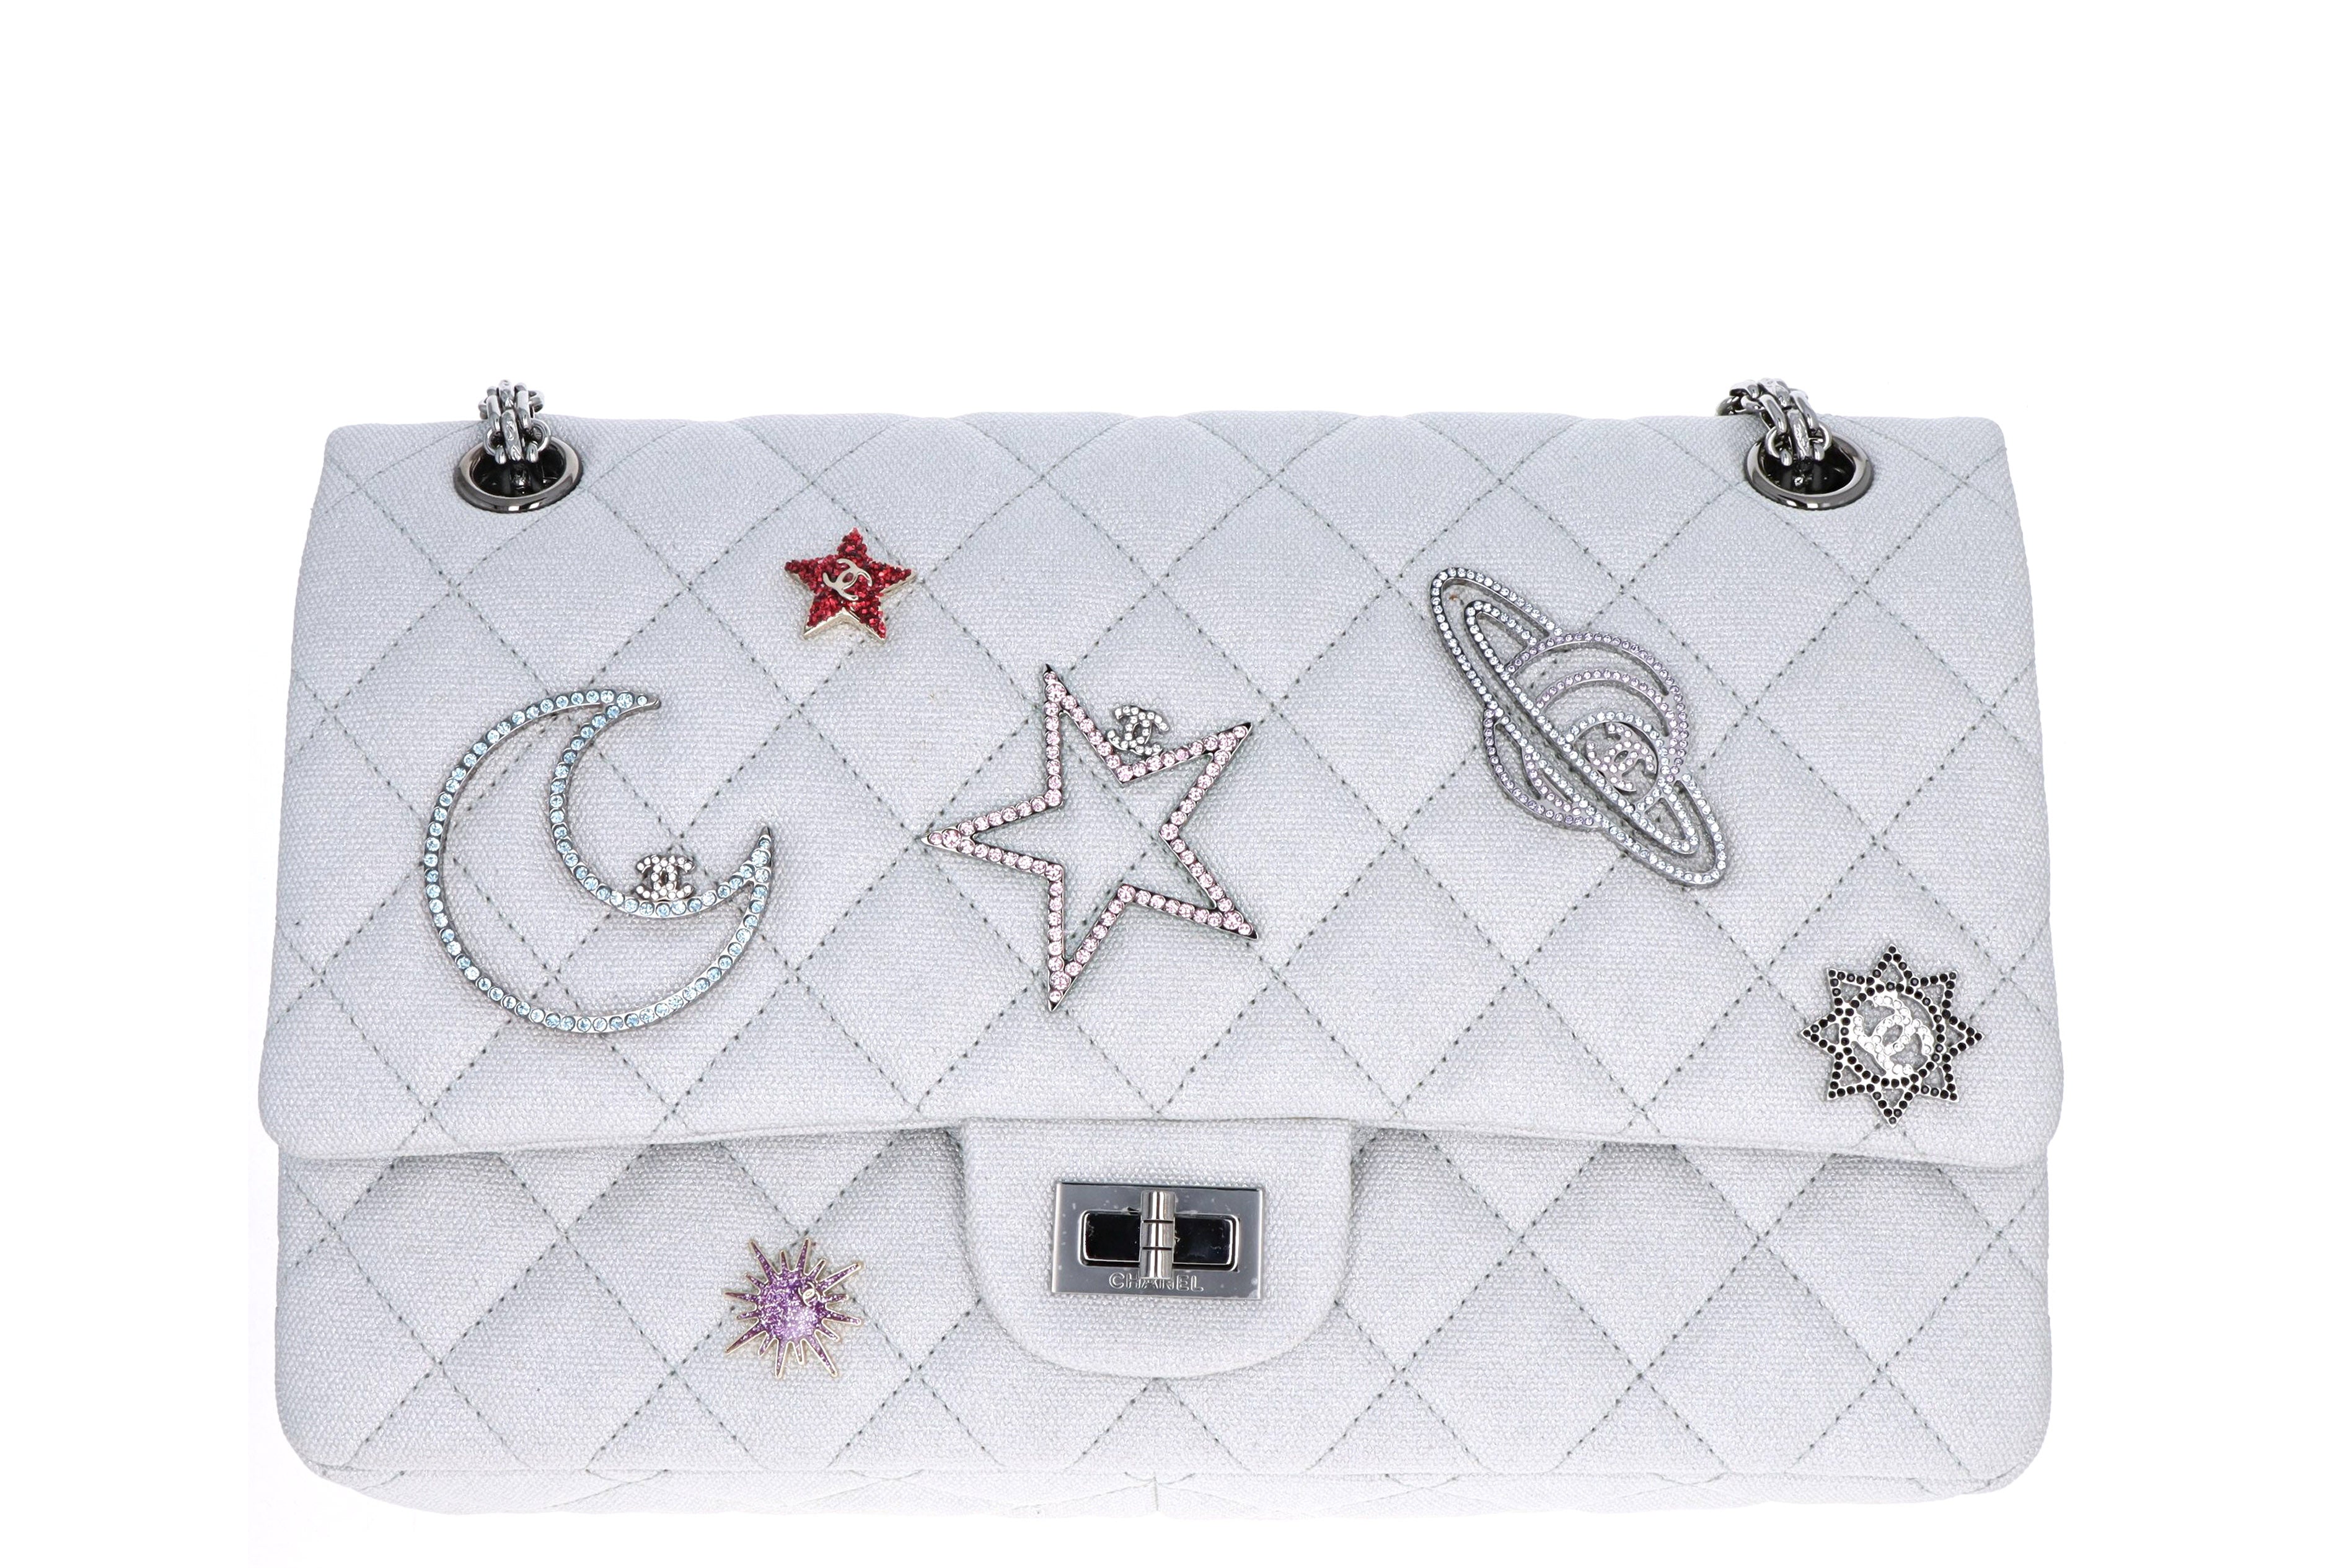 Chanel Limited Edition Silver 2.55 Canvas Reissue Space Charms 266 Flap Bag